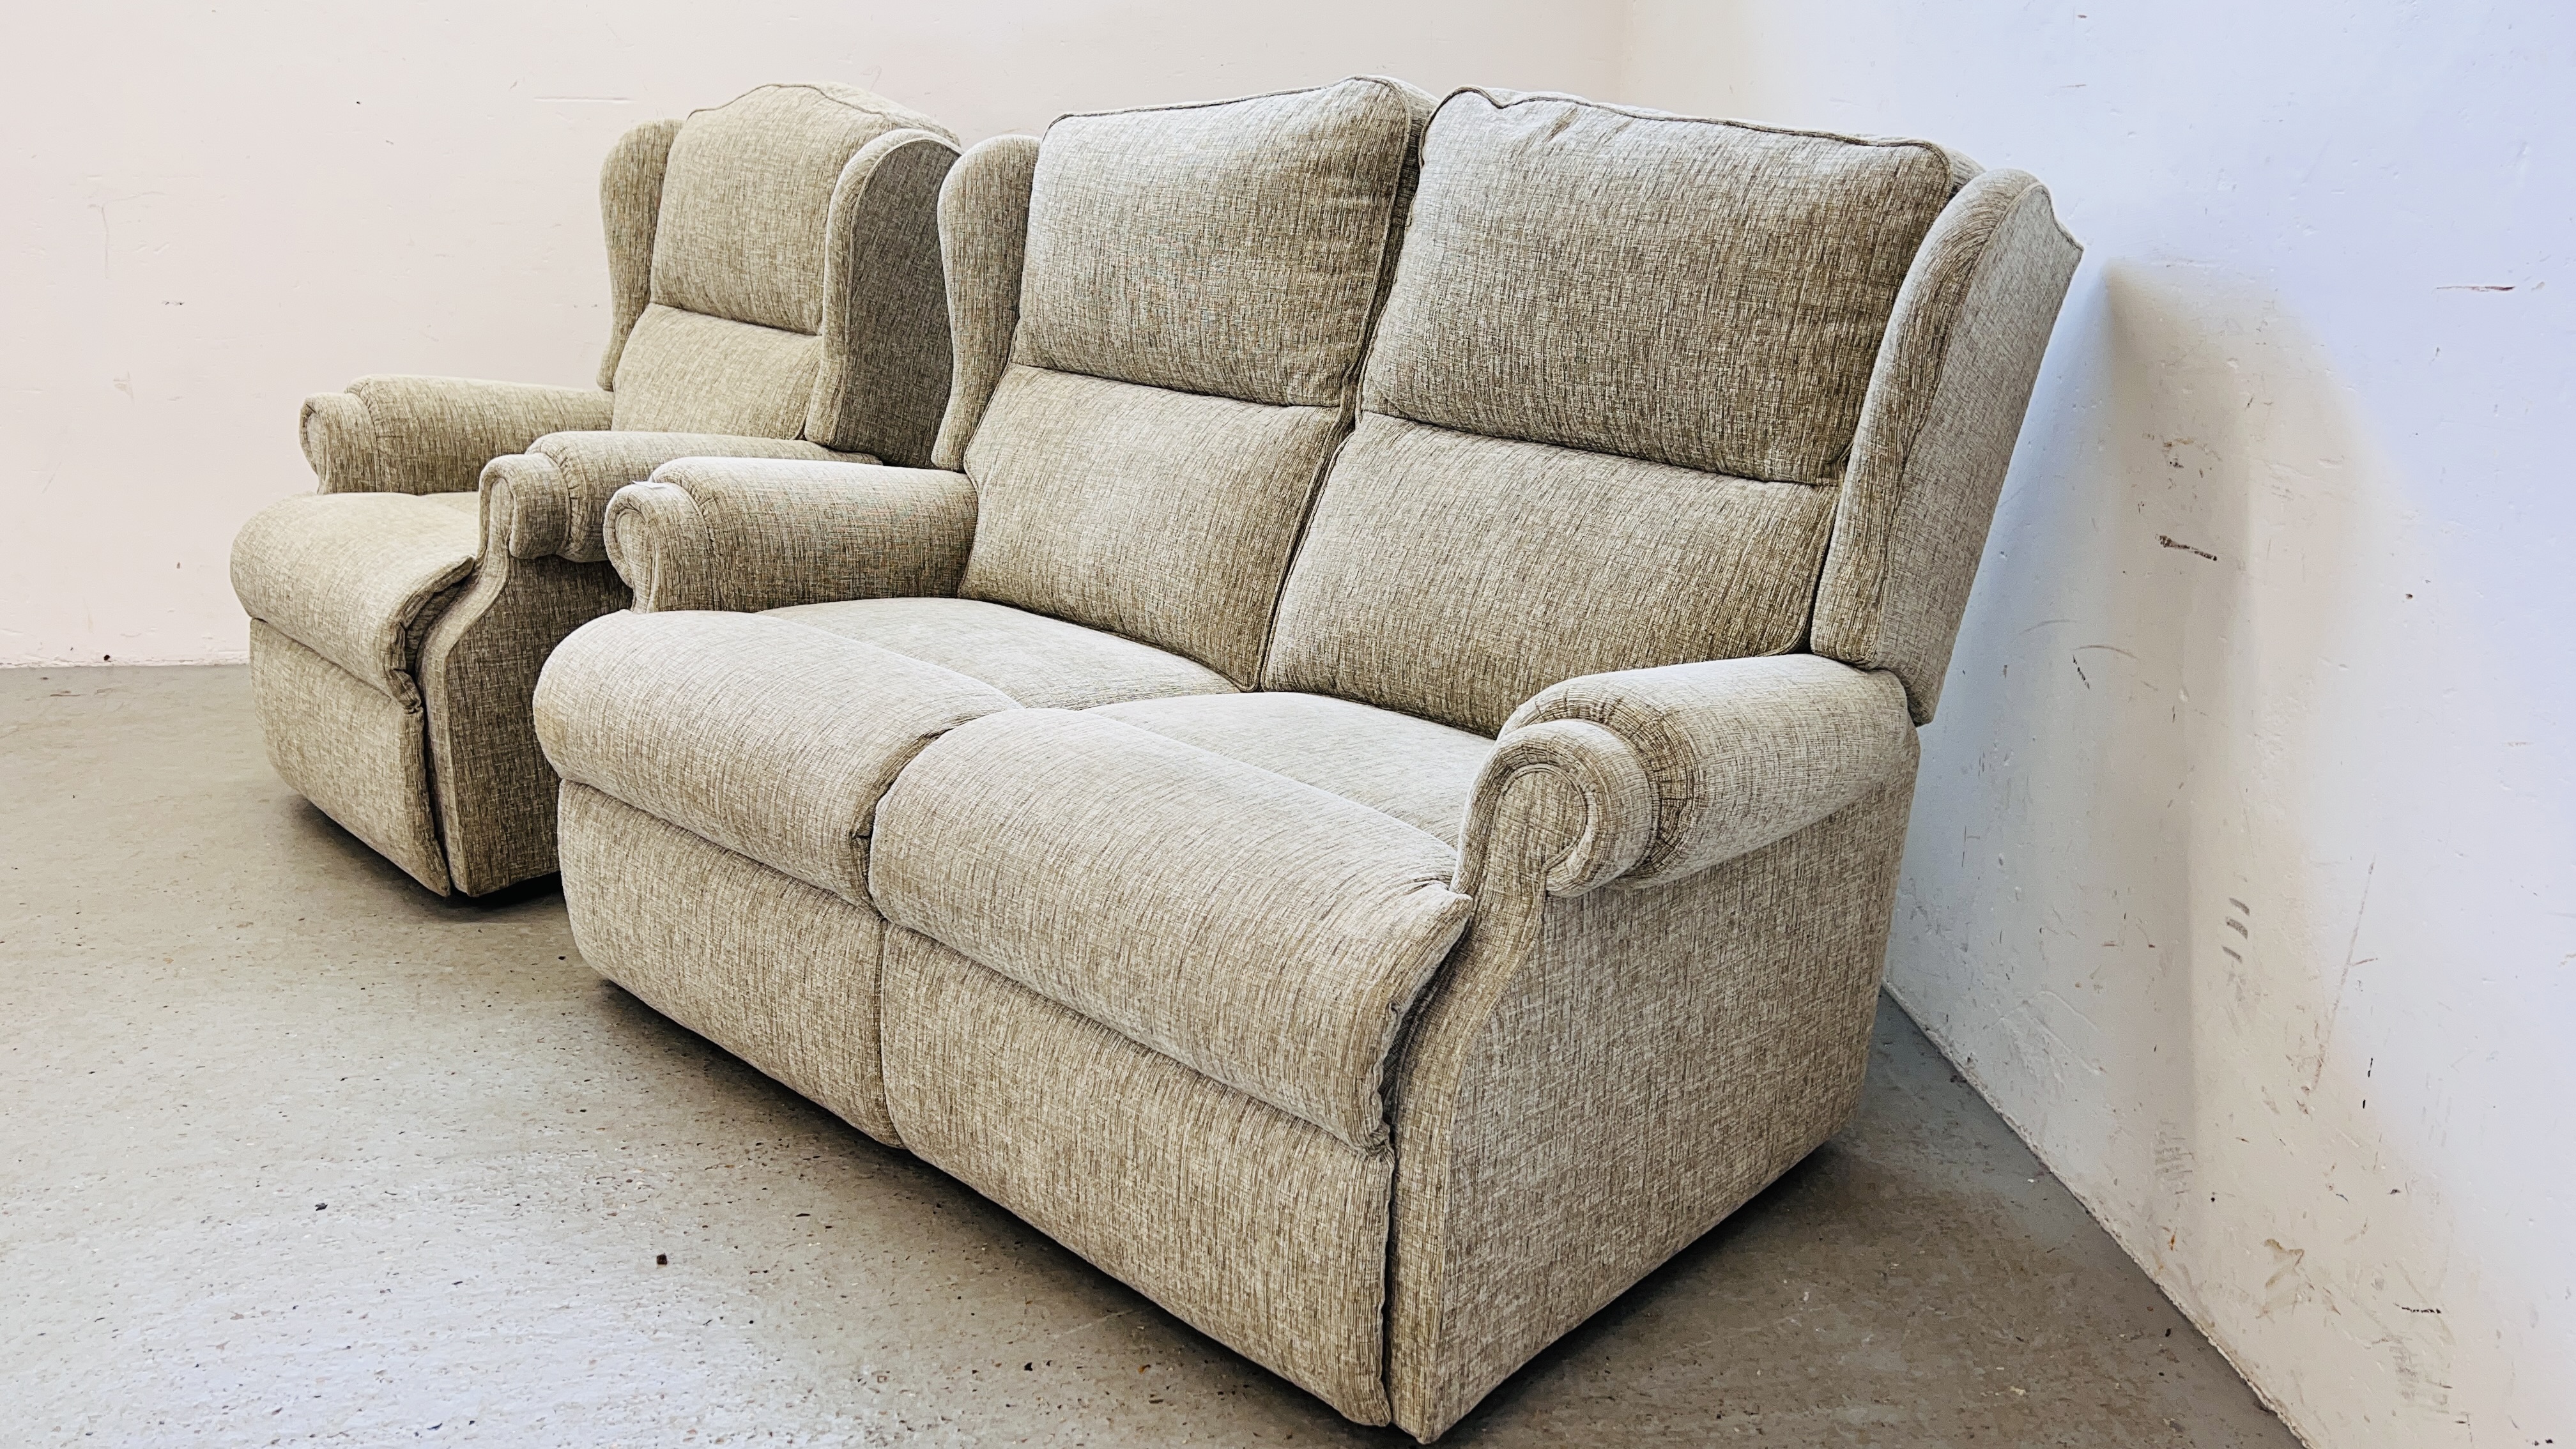 A GOOD QUALITY "SHERBORNE" TWO SEATER SOFA W 140CM X D 82CM X H 94CM ALONG WITH A MATCHING ARMCHAIR. - Image 3 of 14